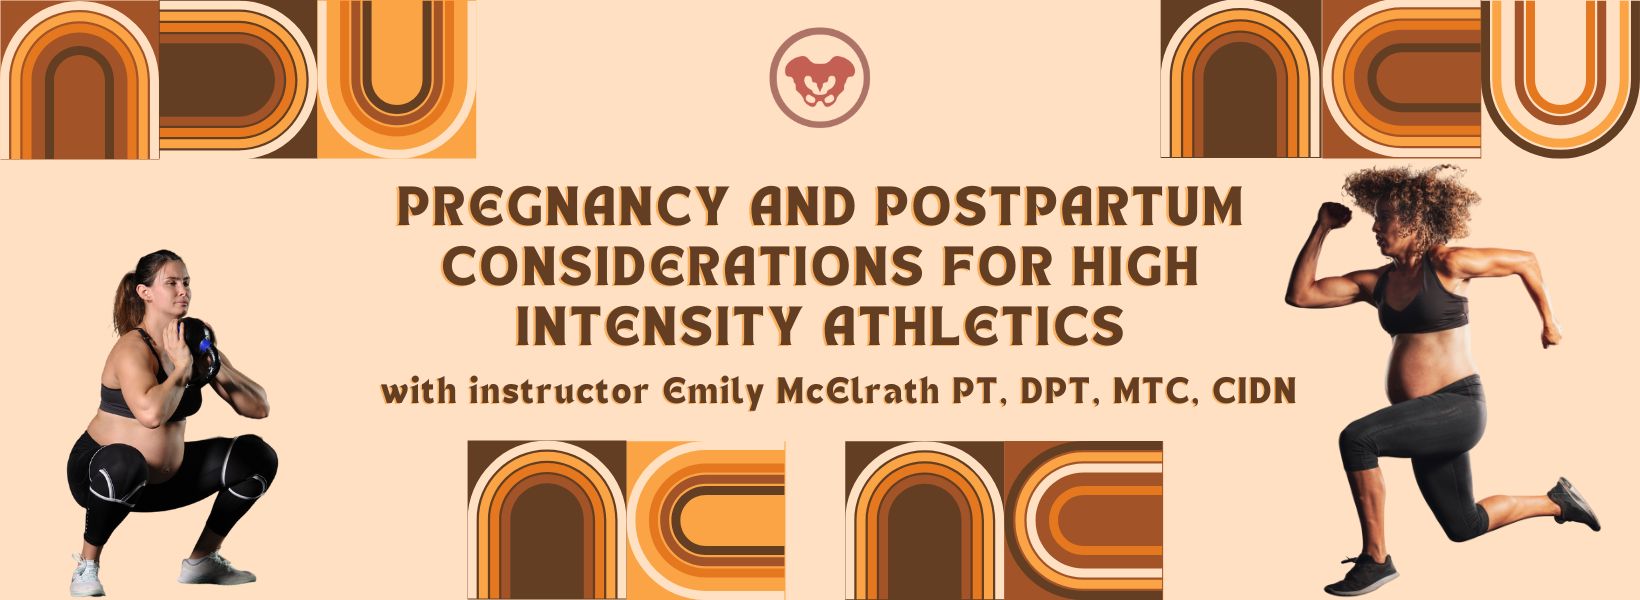 Special Considerations for Pregnant and Postpartum Athletes - A Conversation with Emily McElrath